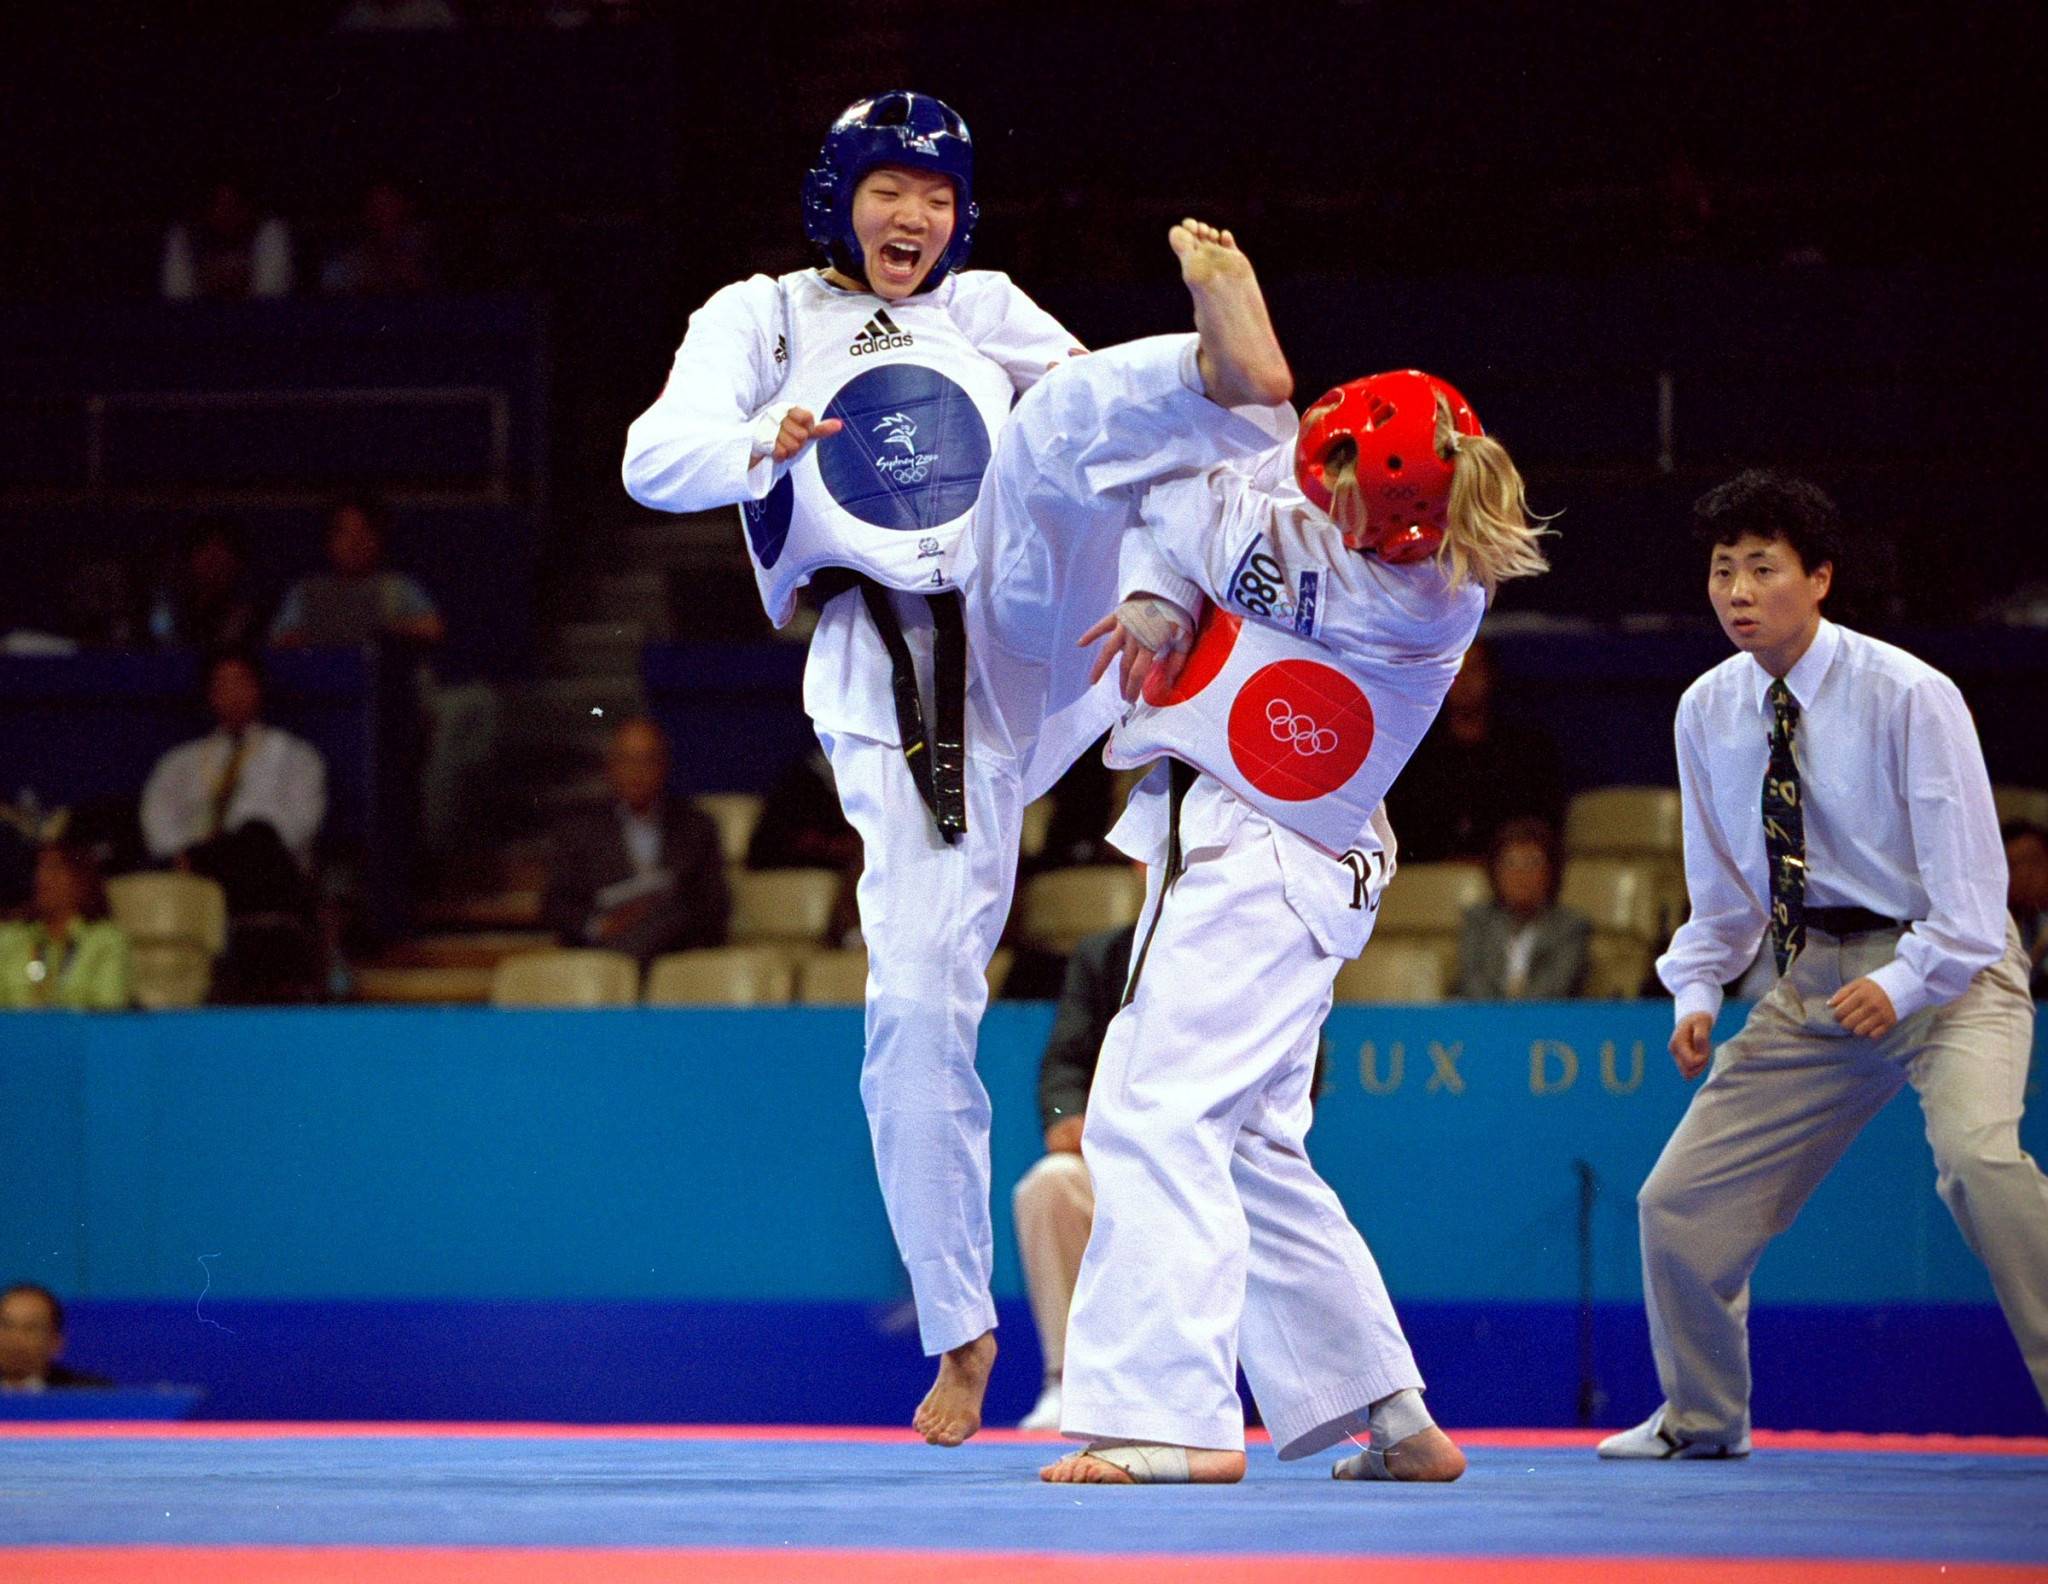 Tokyo 2020 will mark 20 years since taekwondo's Olympic debut at Sydney 2000 ©Getty Images